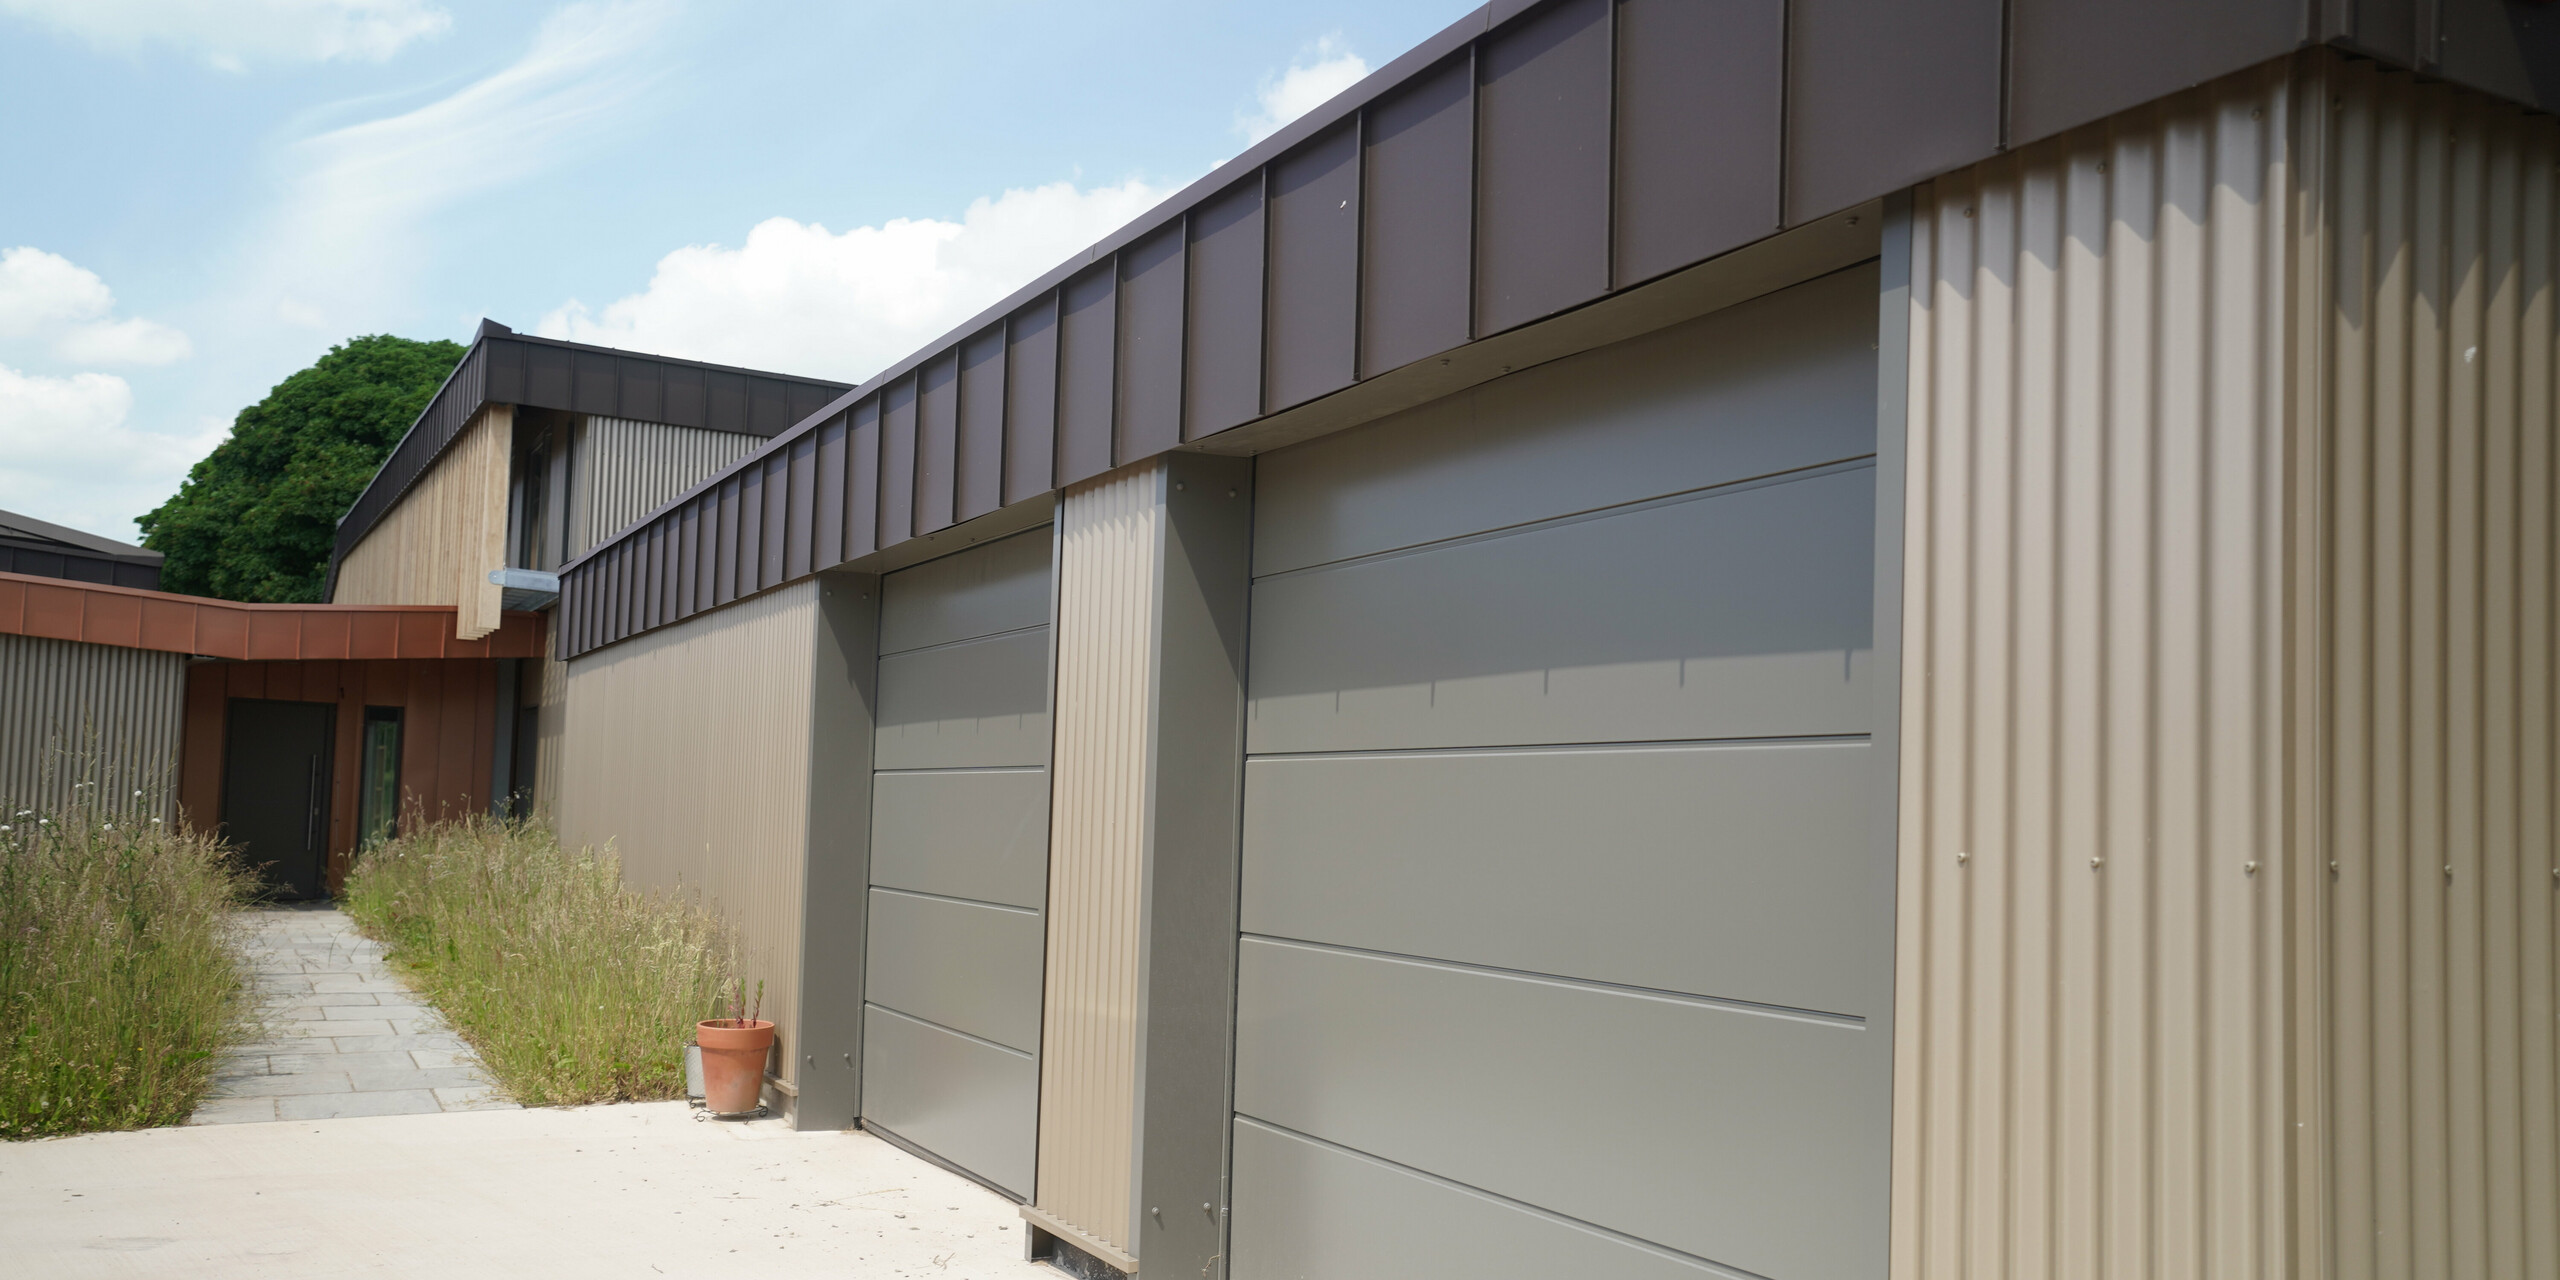 Garage doors of a longhouse in Derbyshire - the building is wrapped in PREFALZ in P.10 Brown and wooden elements